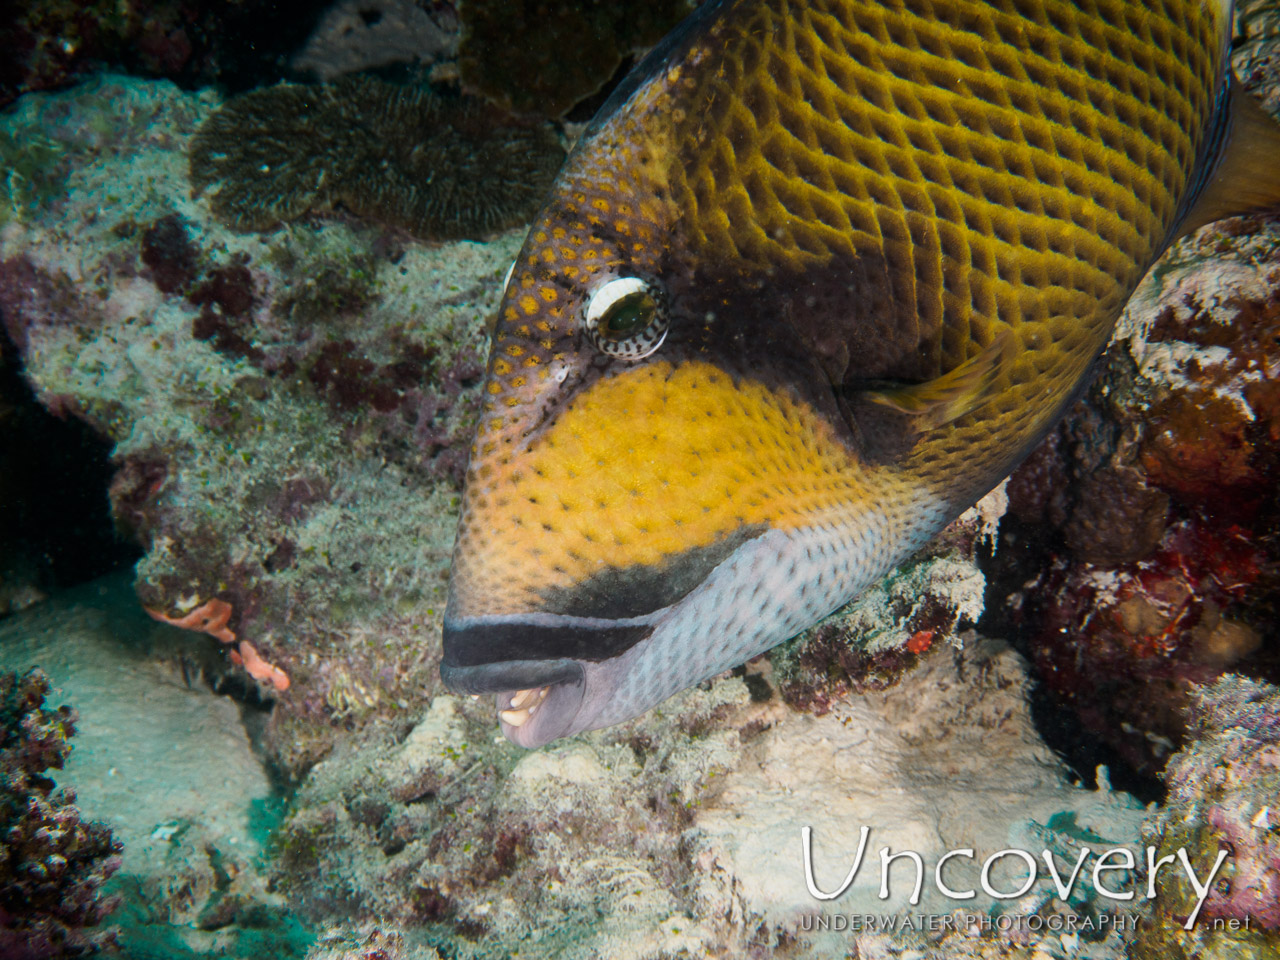 Titan Triggerfish (balistoides Viridescens), photo taken in Maldives, Male Atoll, South Male Atoll, Out Wreck